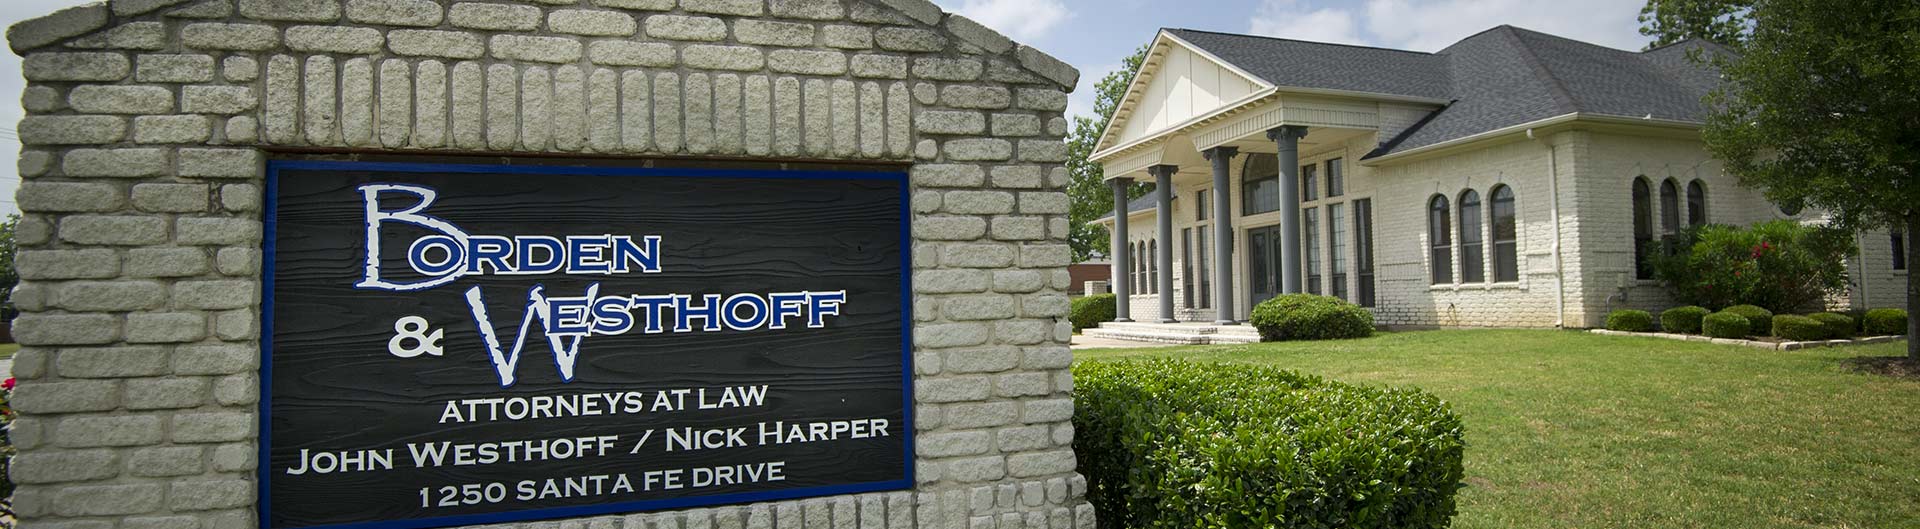 Borden & Westhoff Law Firm, Weatherford, Texas